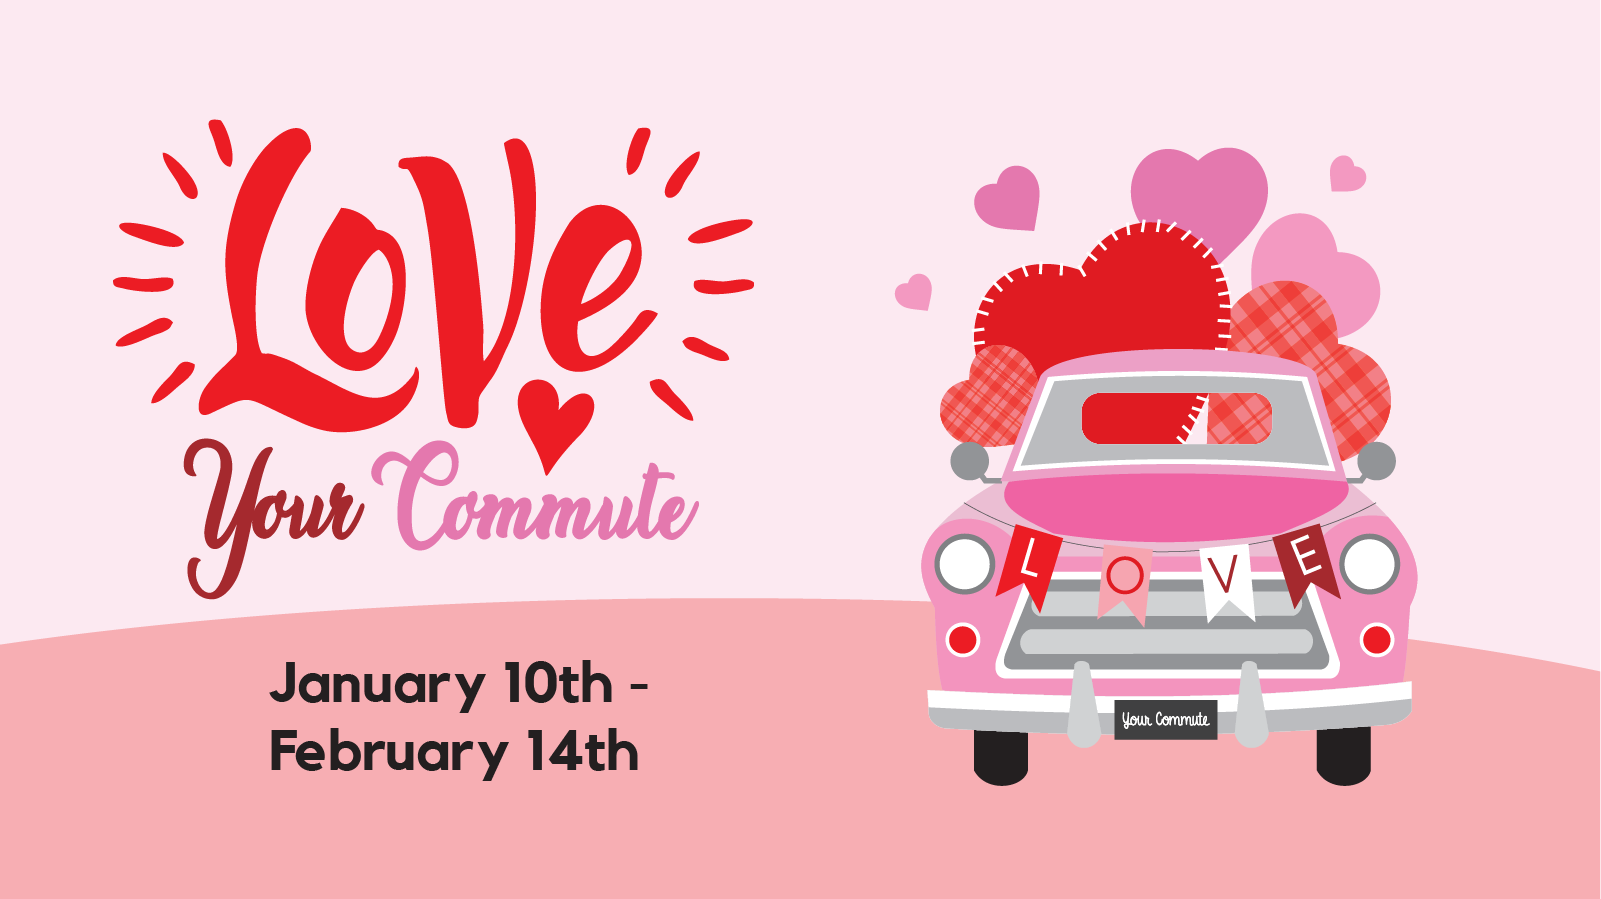 Love your commute January 10th to February 14th with illustration of a car filled with hearts